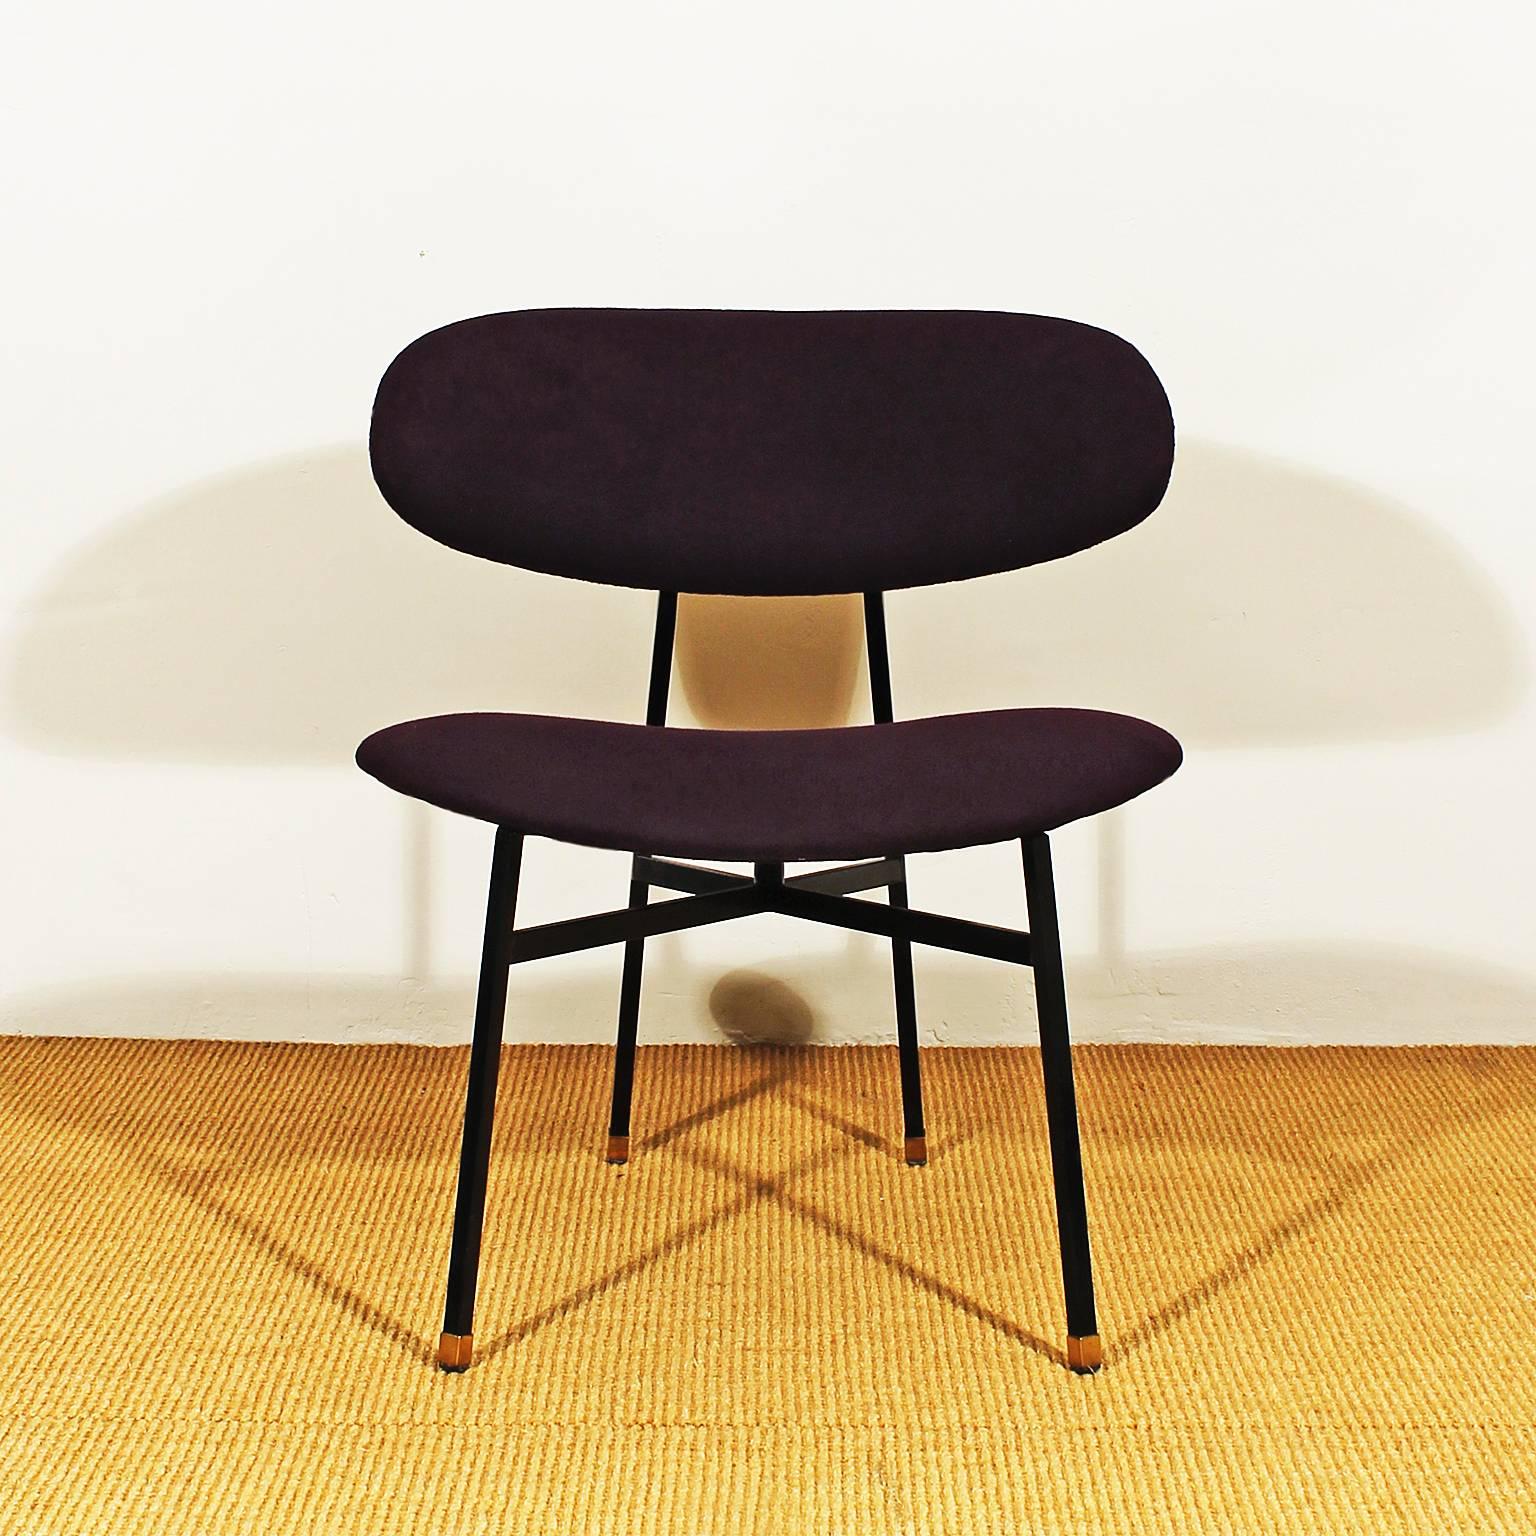 Pair of low chairs, black lacquered iron structure, polished brass hardware, curved seat and back, new violet felt upholstery,

Italy, circa 1950.